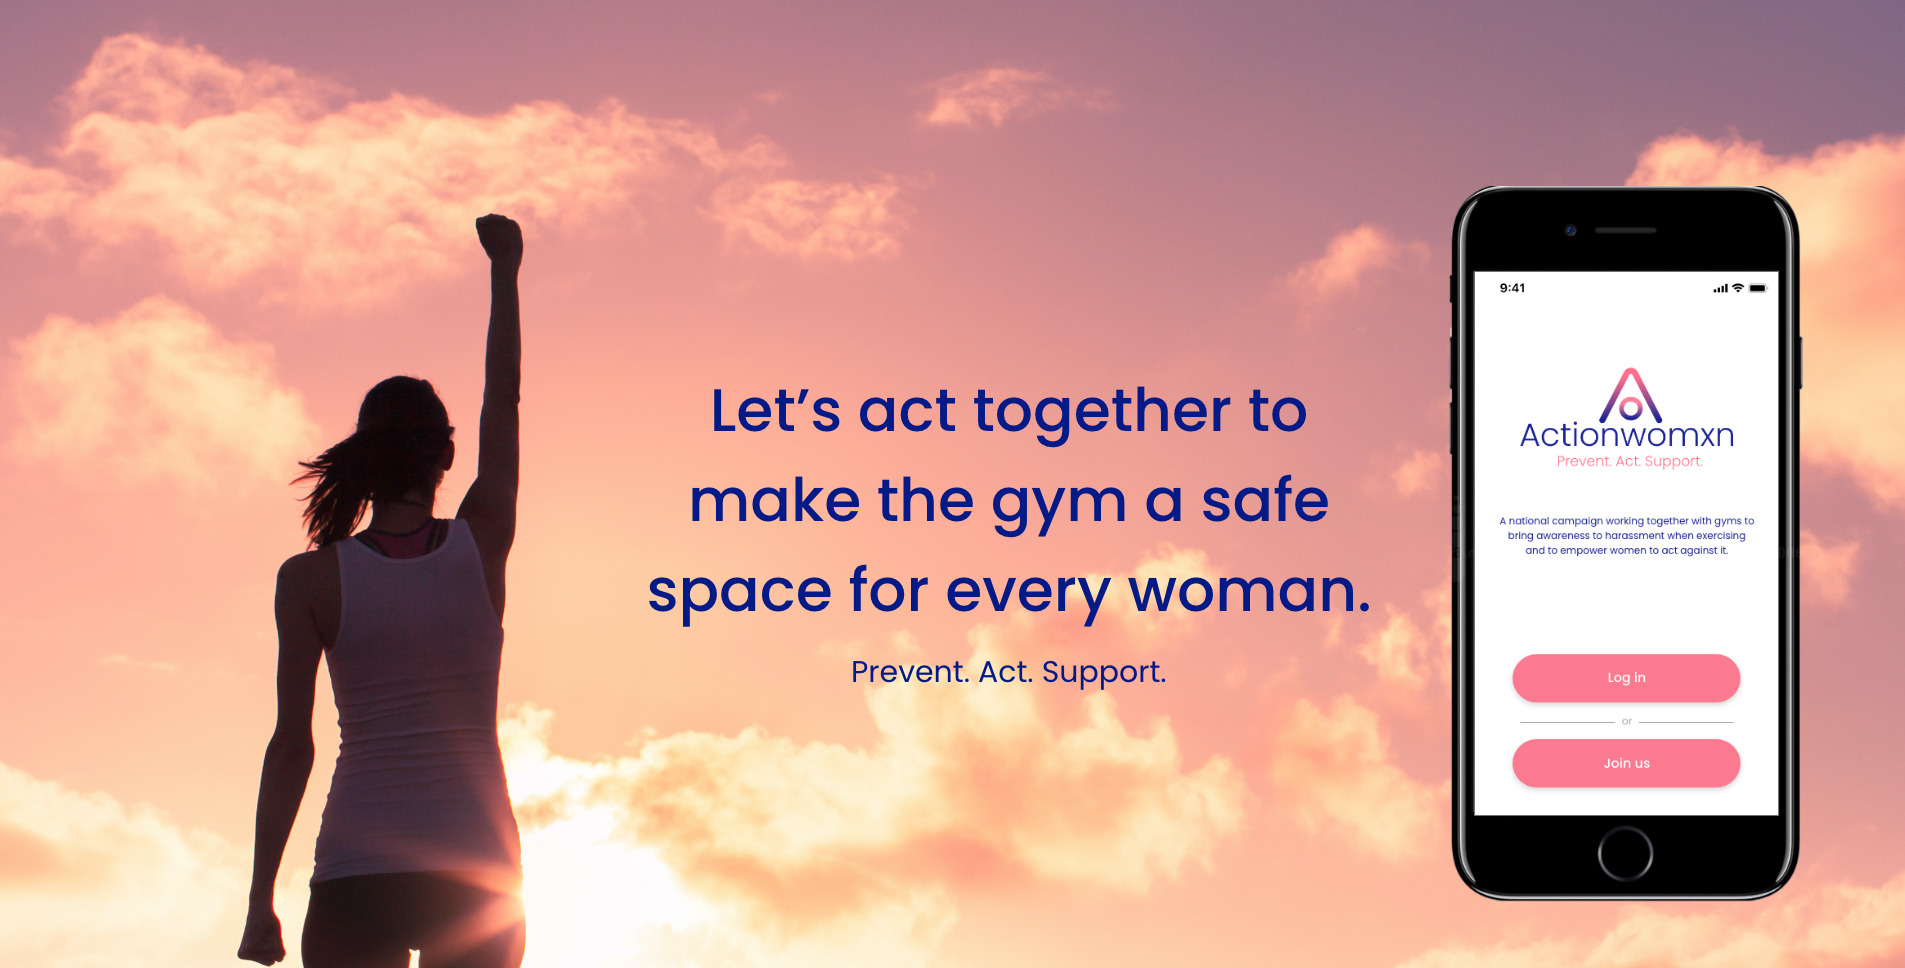 Why women need safe spaces to workout